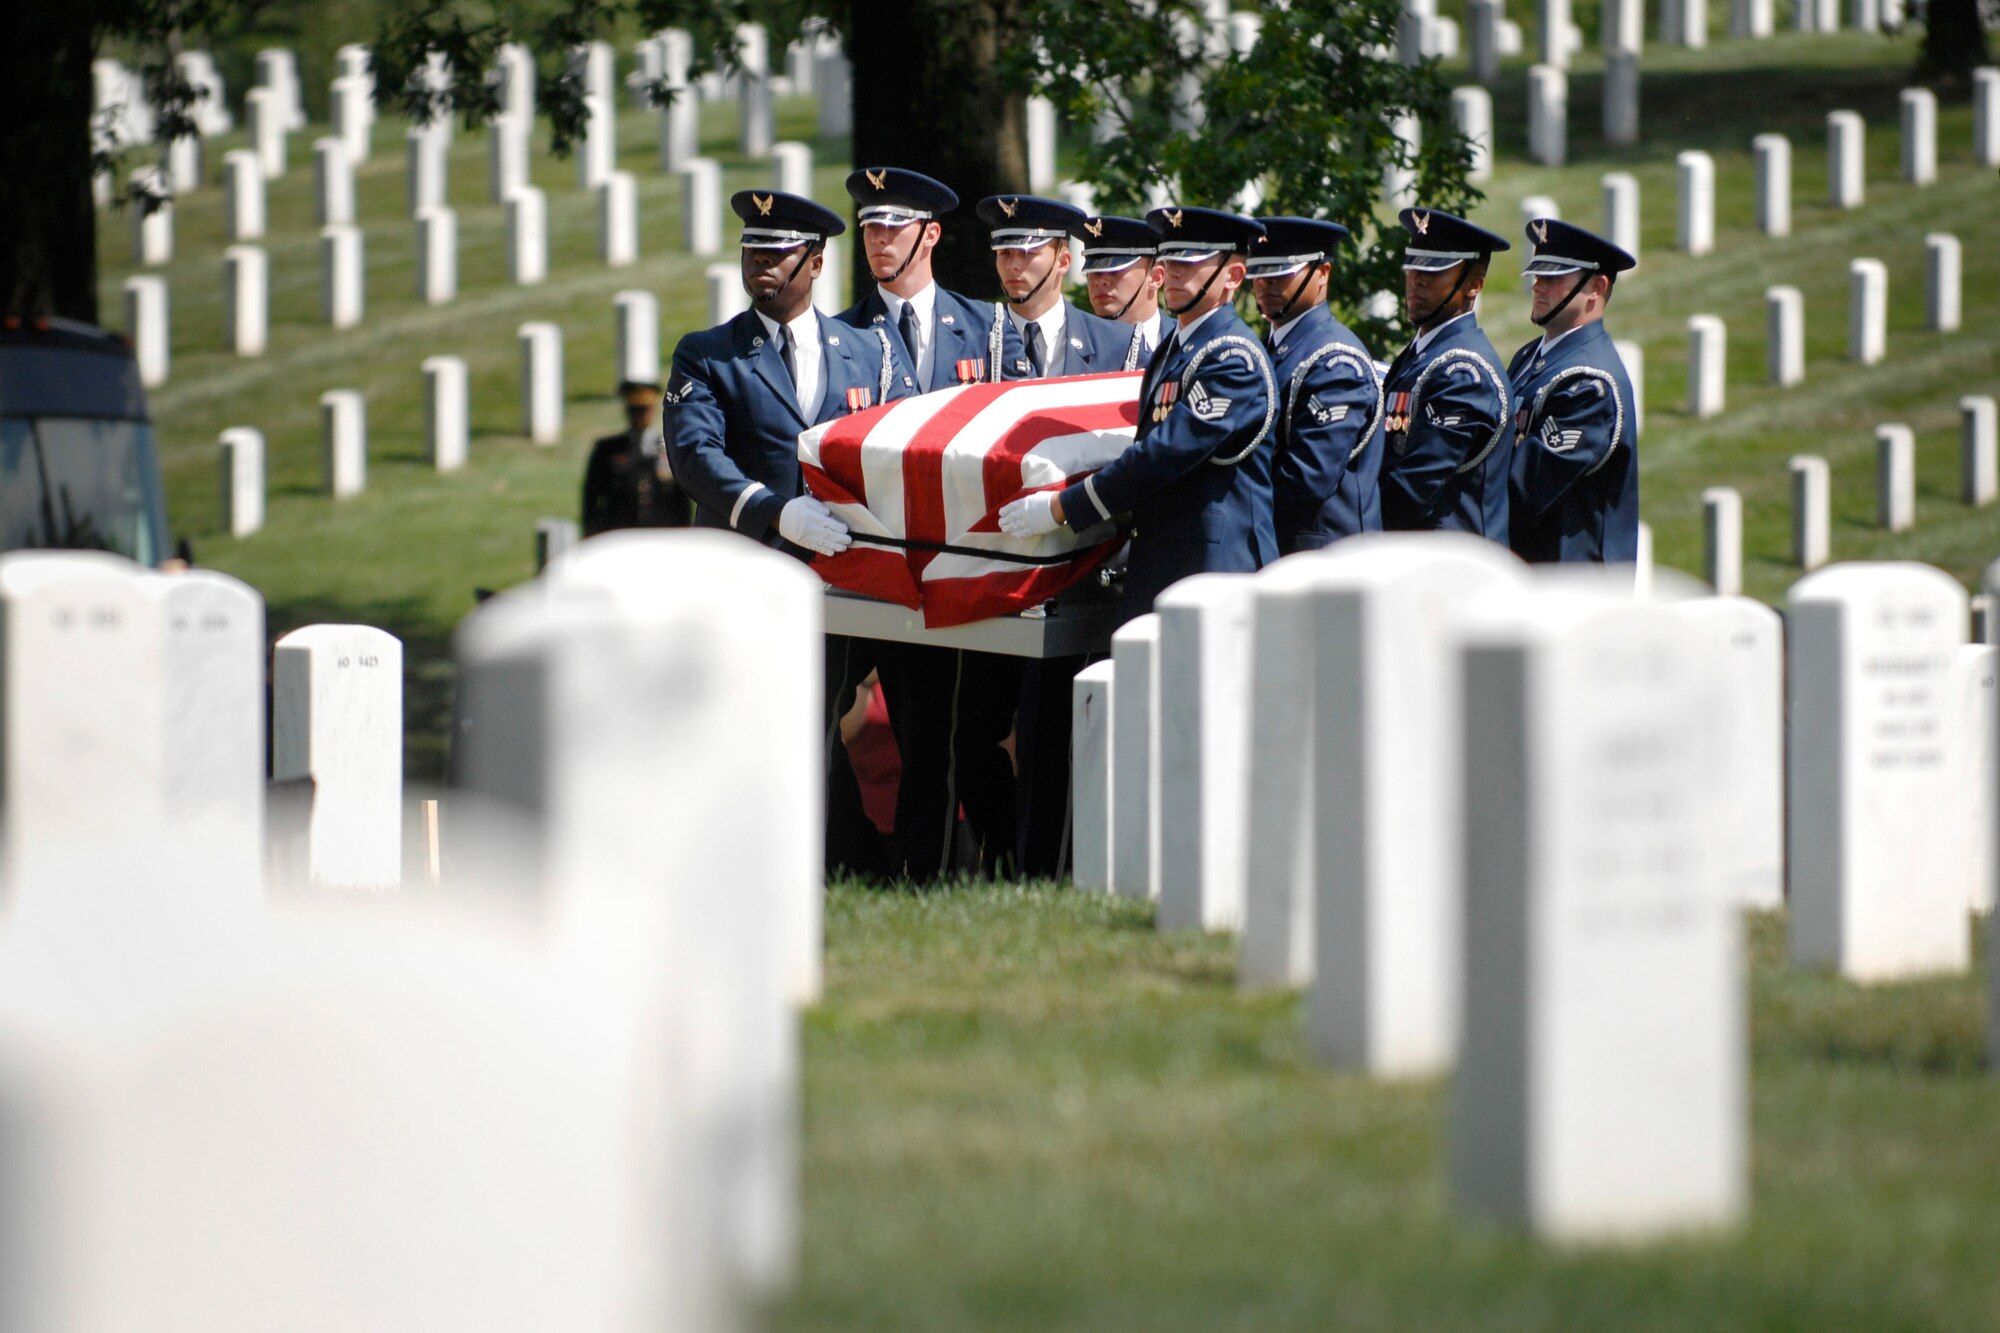 An Air Force honor guard carries a casket holding unidentified remains during a burial service at Arlington National Cemetery, June 17, 2010. The ceremony honored 14 airmen who were killed in March 1972 when their aircraft was shot down over southern Laos. (DoD photo by Army Sgt. 1st Class Michael J. Carden) 